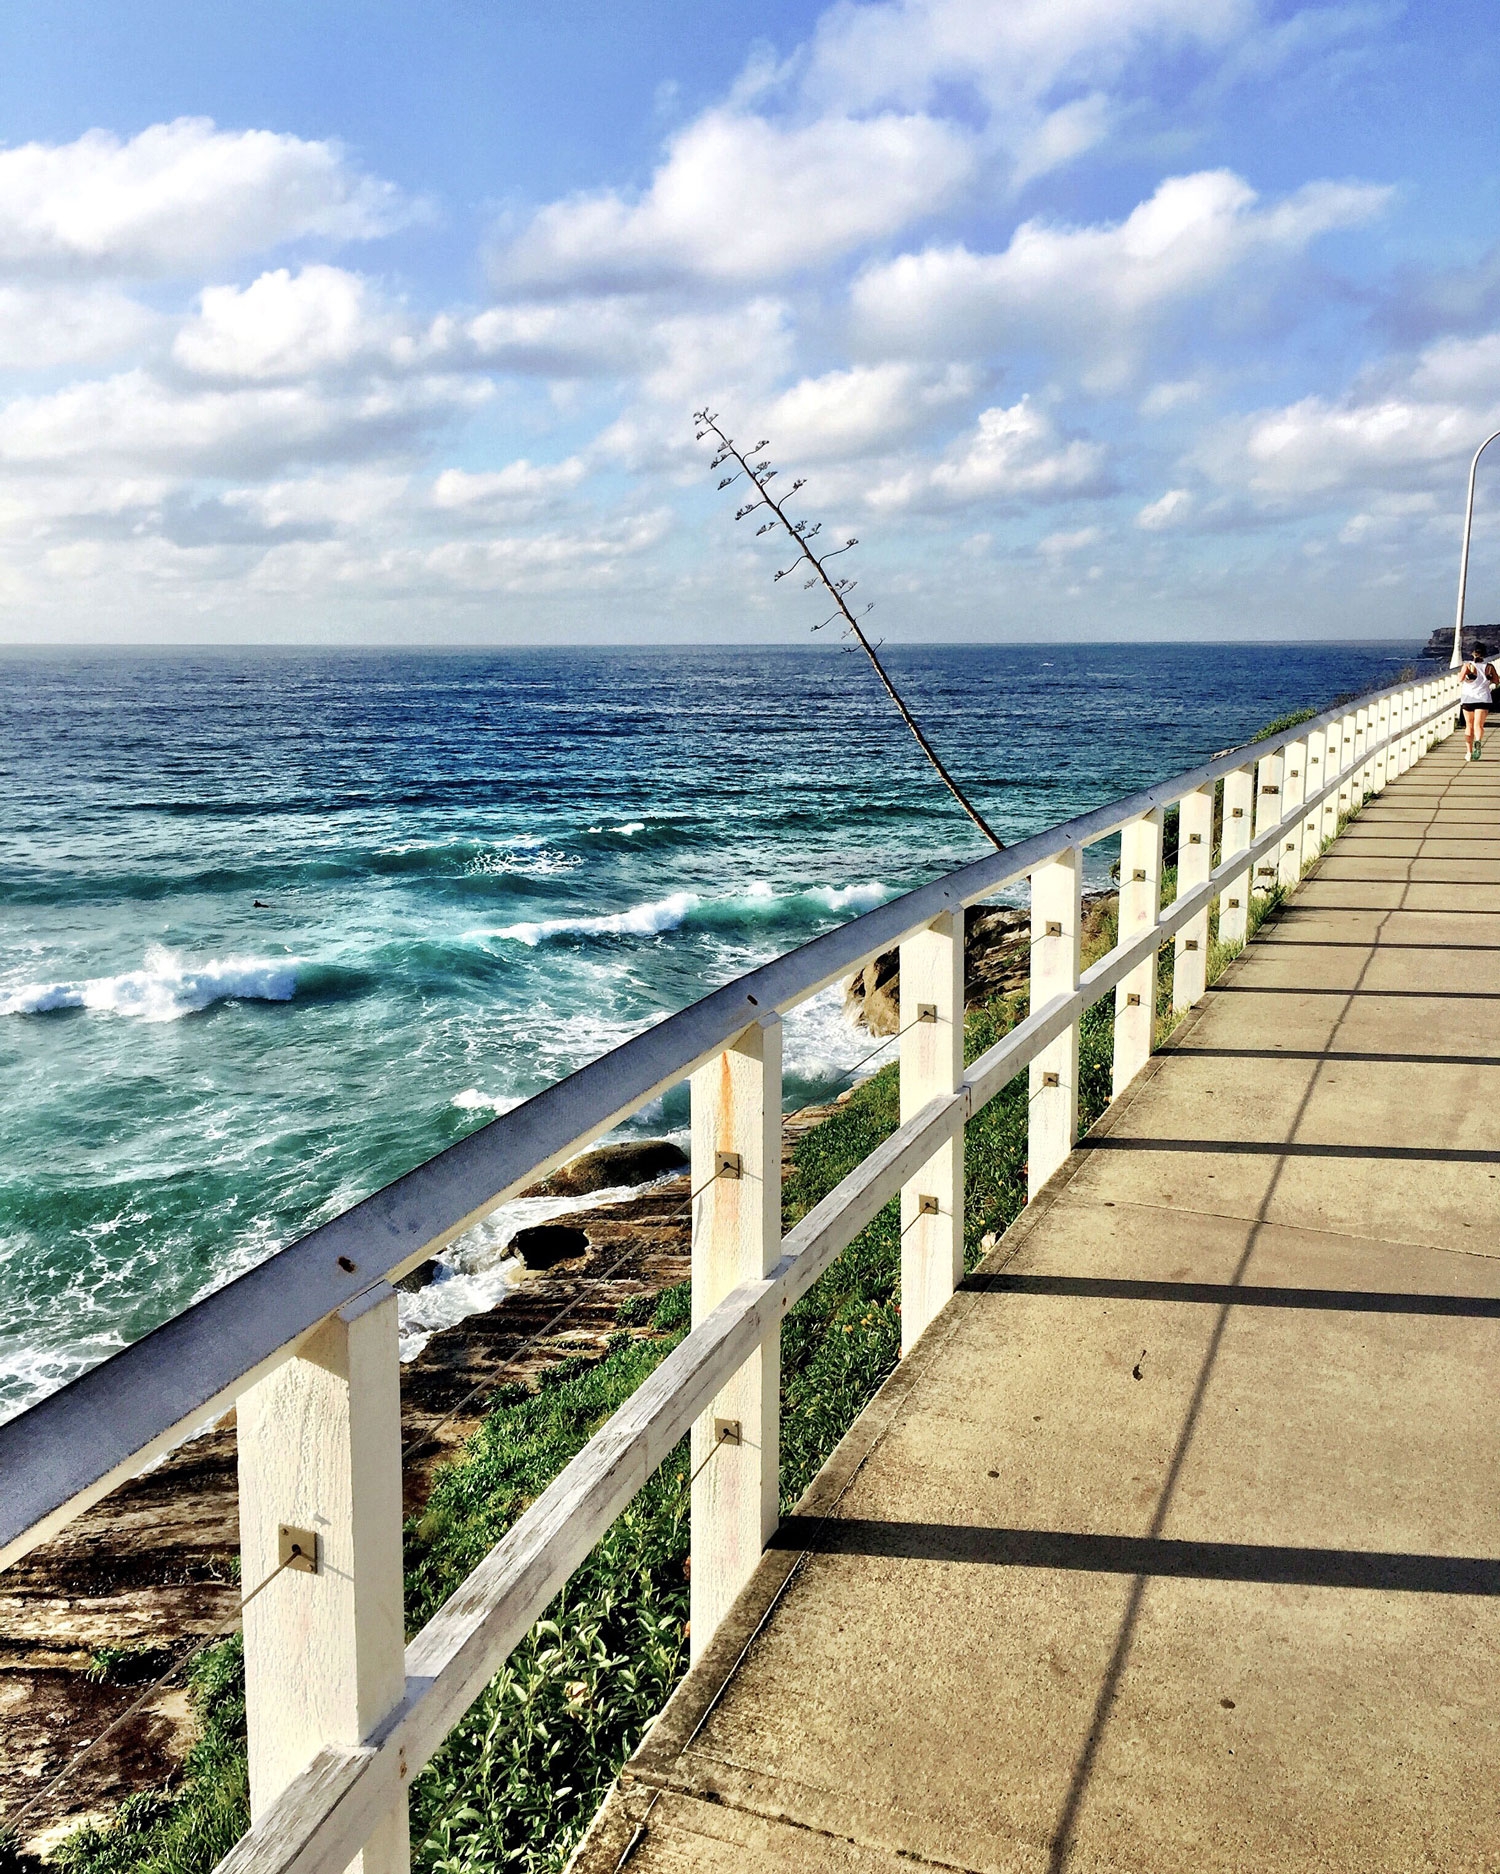 A view of the ocean on the Bondi to Bronte walk, April 2016 